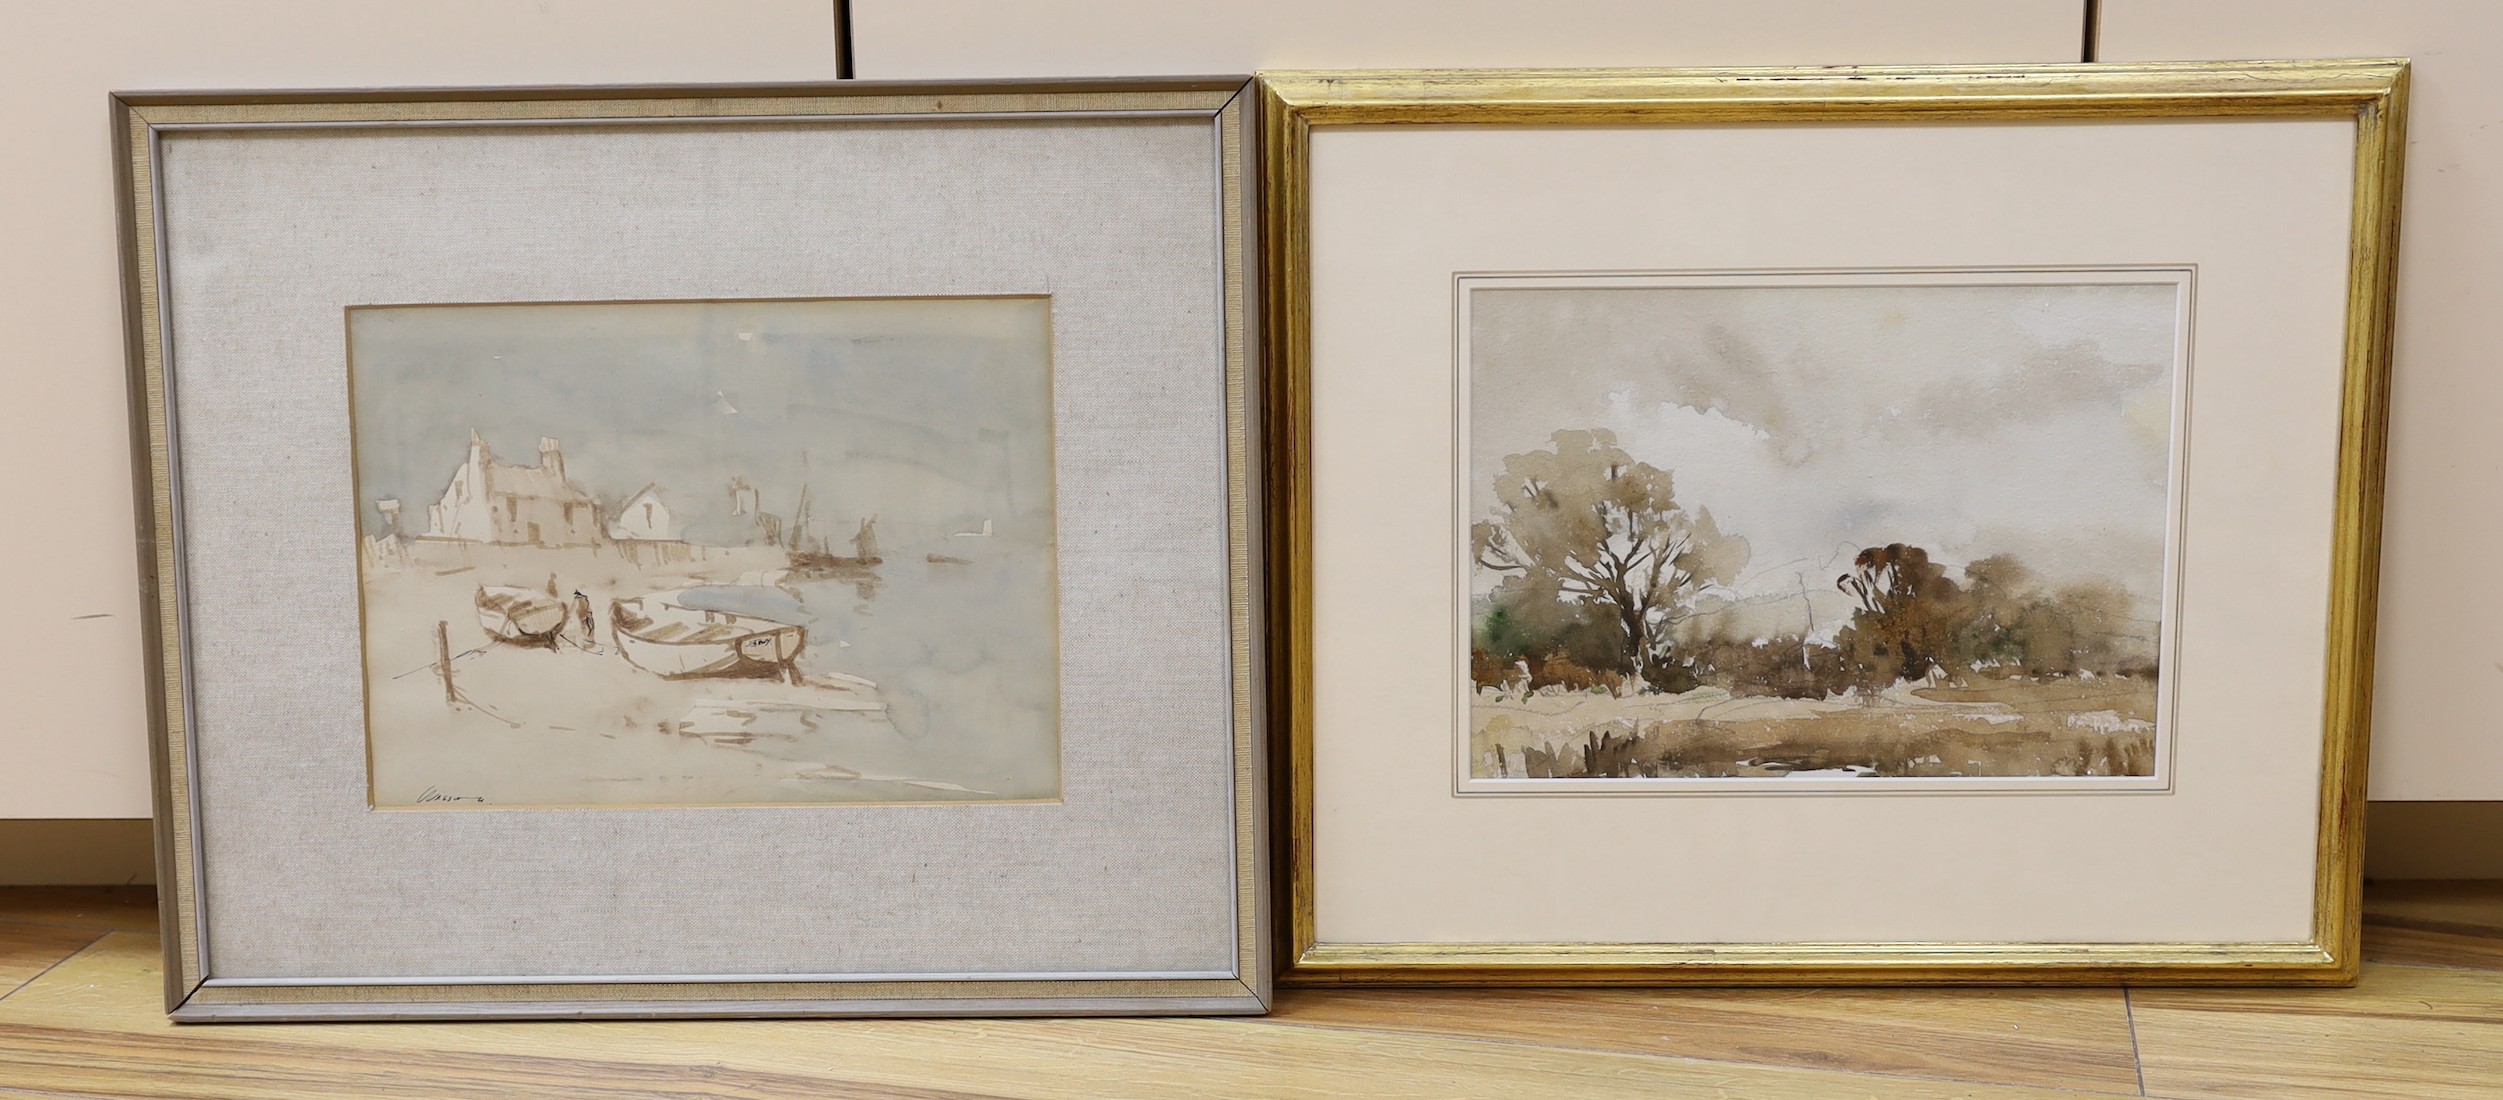 Edward Wesson (1910-1983), ink and watercolour, Coastal scene, signed, 21 x 29cm and an unsigned watercolour of trees, 20 x 28cm